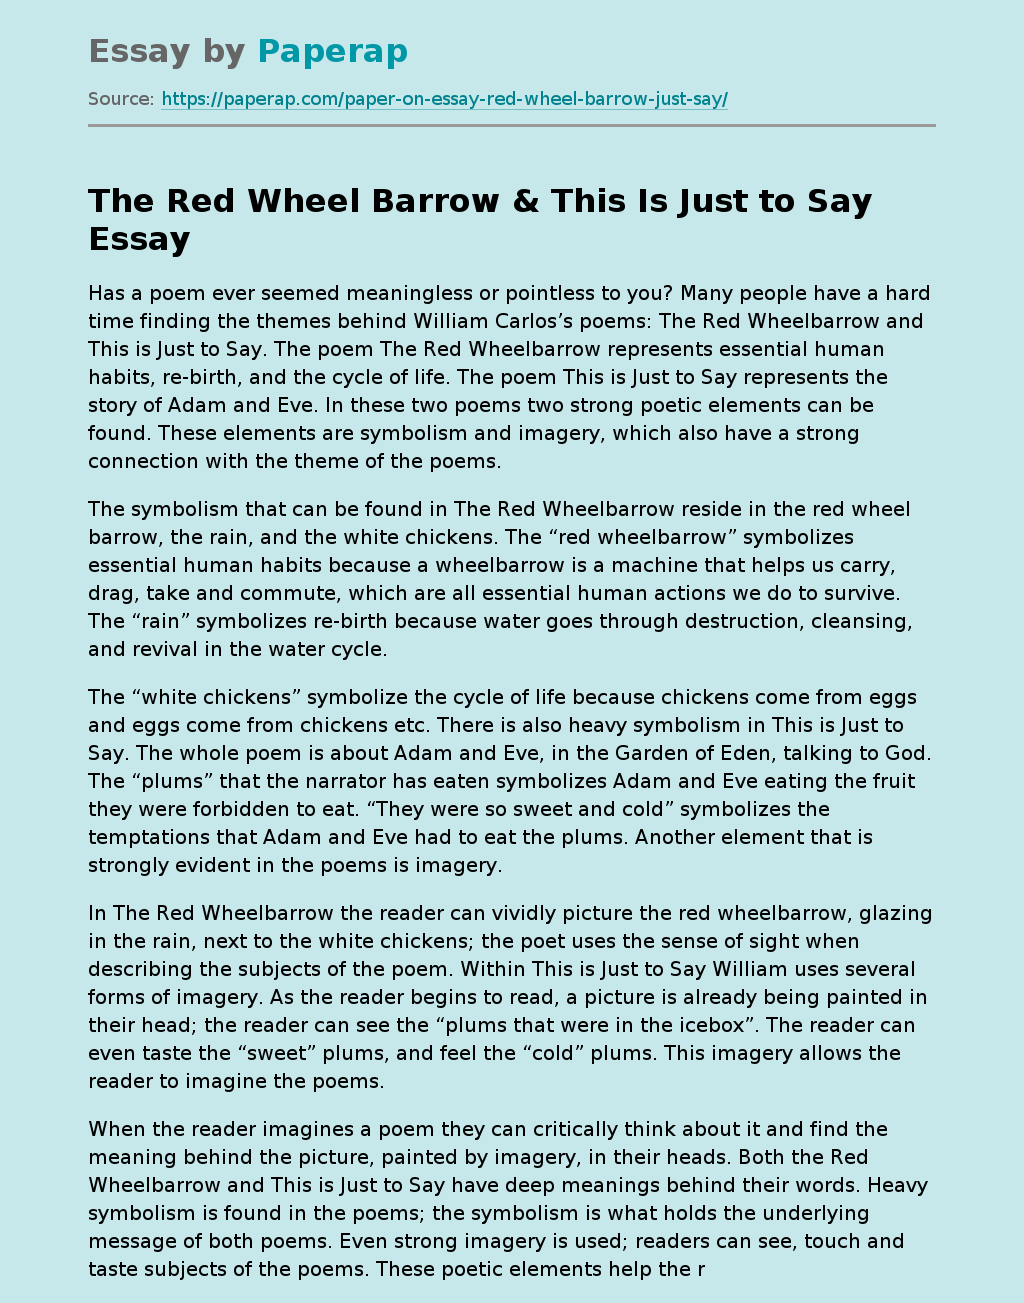 The Red Wheel Barrow & This Is Just to Say